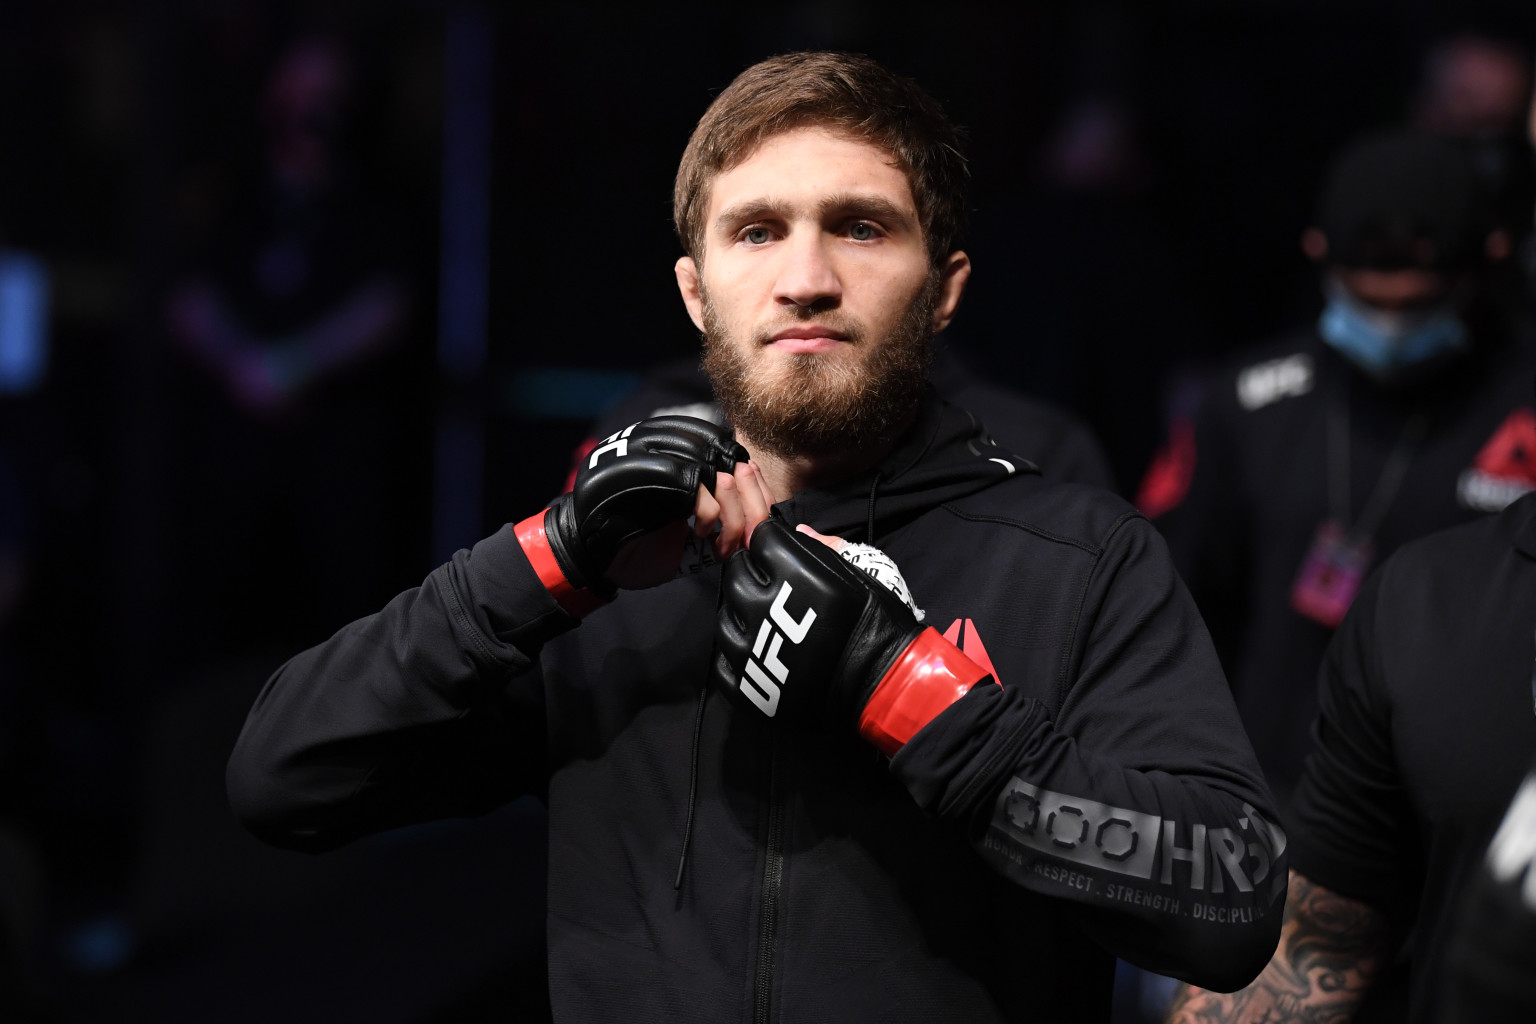 ABU DHABI, UNITED ARAB EMIRATES - OCTOBER 18:  Said Nurmagomedov of Russia walks to the Octagon prior to his bantamweight bout against Mark Striegl of Philippines during the UFC Fight Night event inside Flash Forum on UFC Fight Island on October 18, 2020 in Abu Dhabi, United Arab Emirates. (Photo by Josh Hedges/Zuffa LLC via Getty Images)